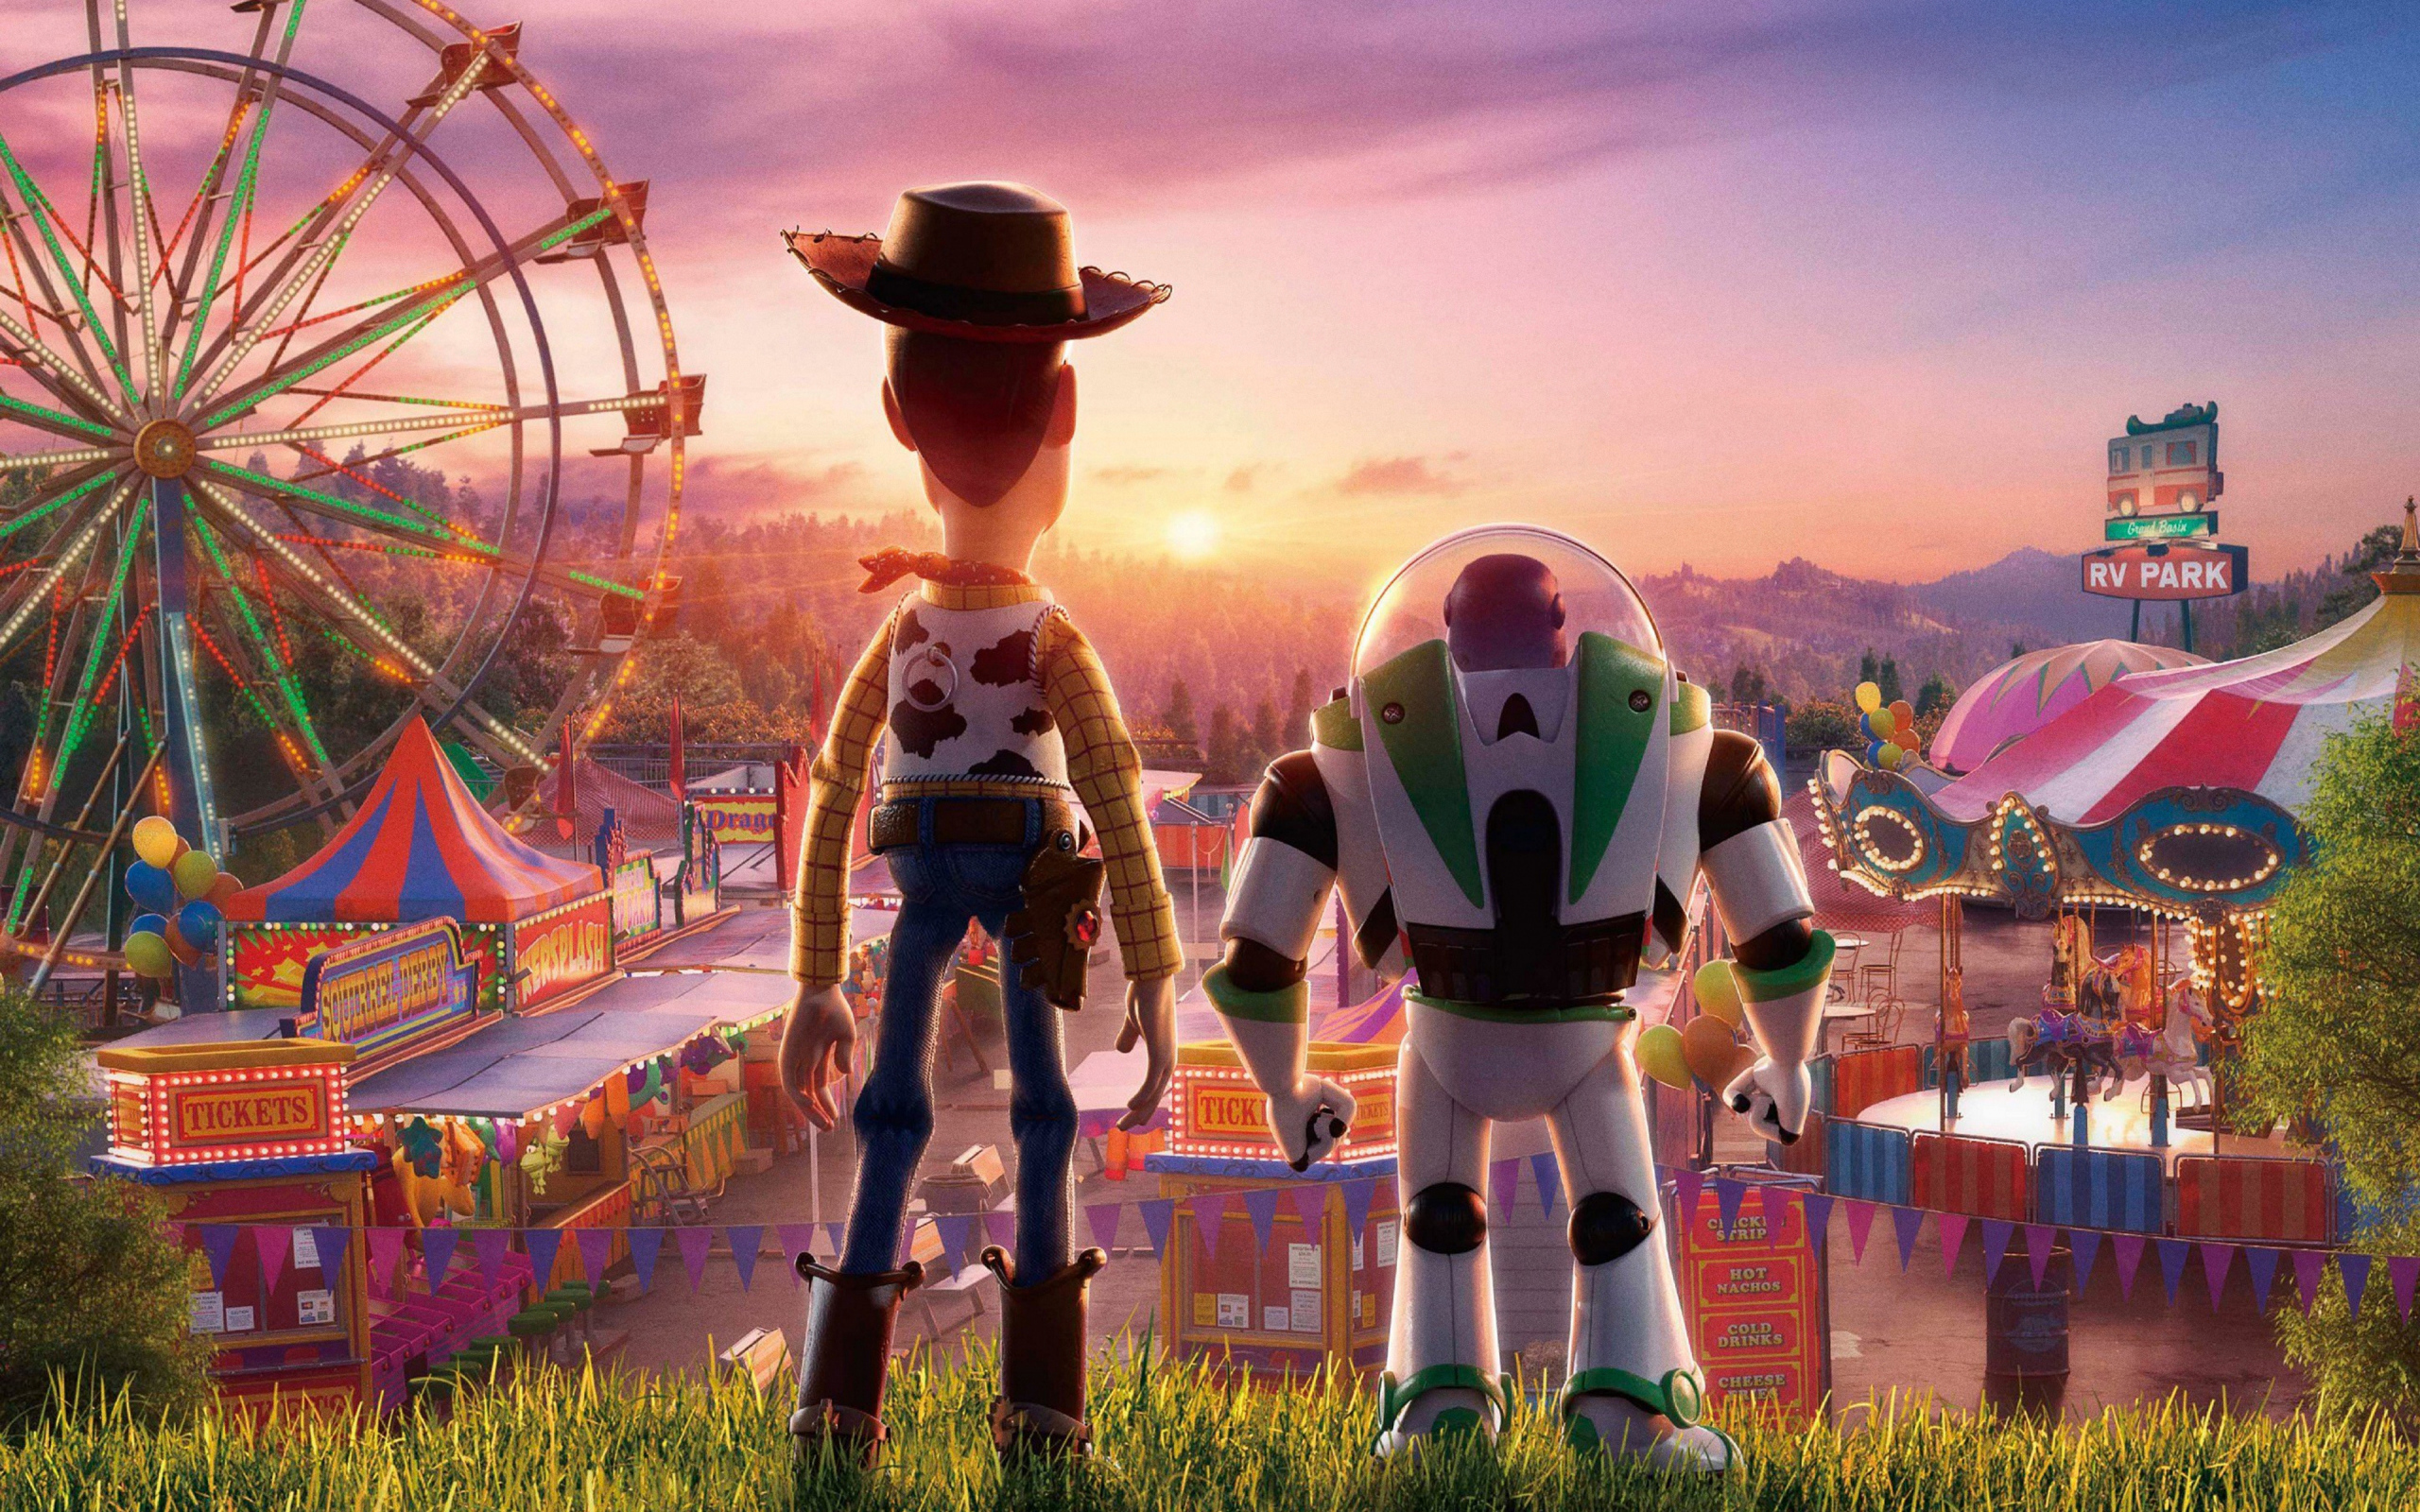 Characters Sheriff Woody and Buzz Lightyear Cartoon Toy Story 4, 2019